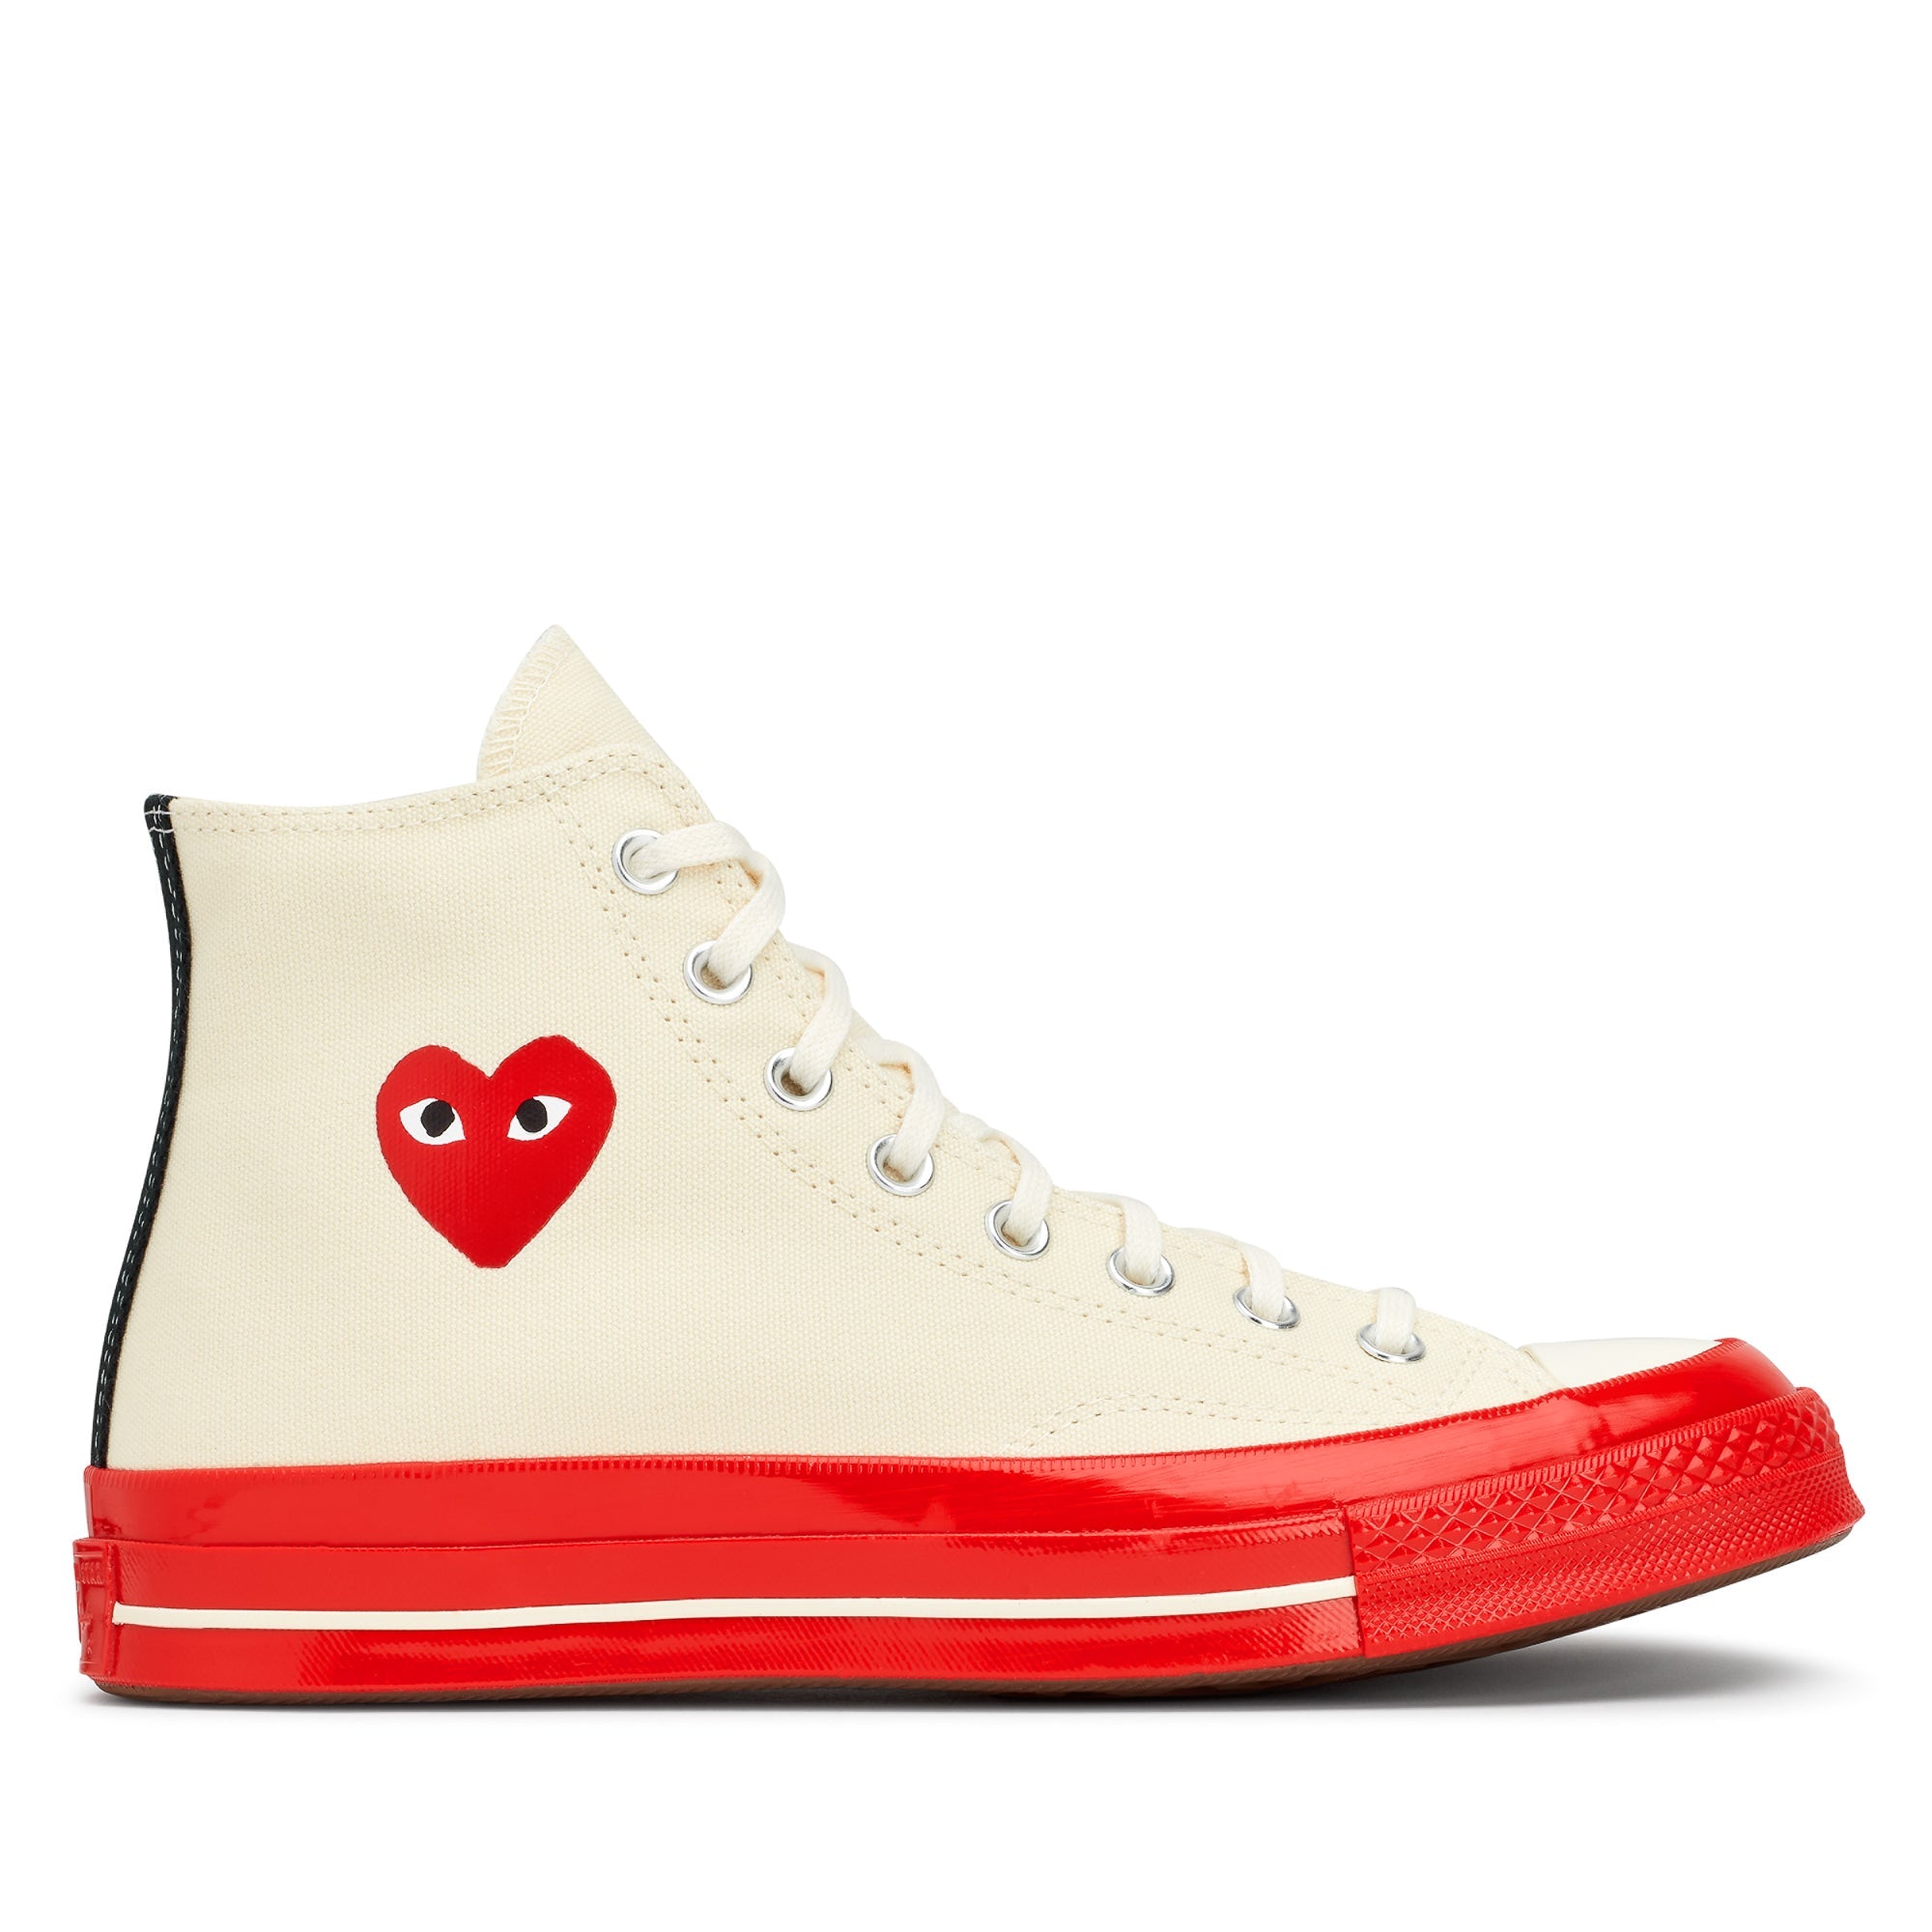 Consejo Rana Musgo Play Converse - Red Heart & Red Sole Chuck 70 High Top Sneakers - (Whi –  DSMNY E-SHOP